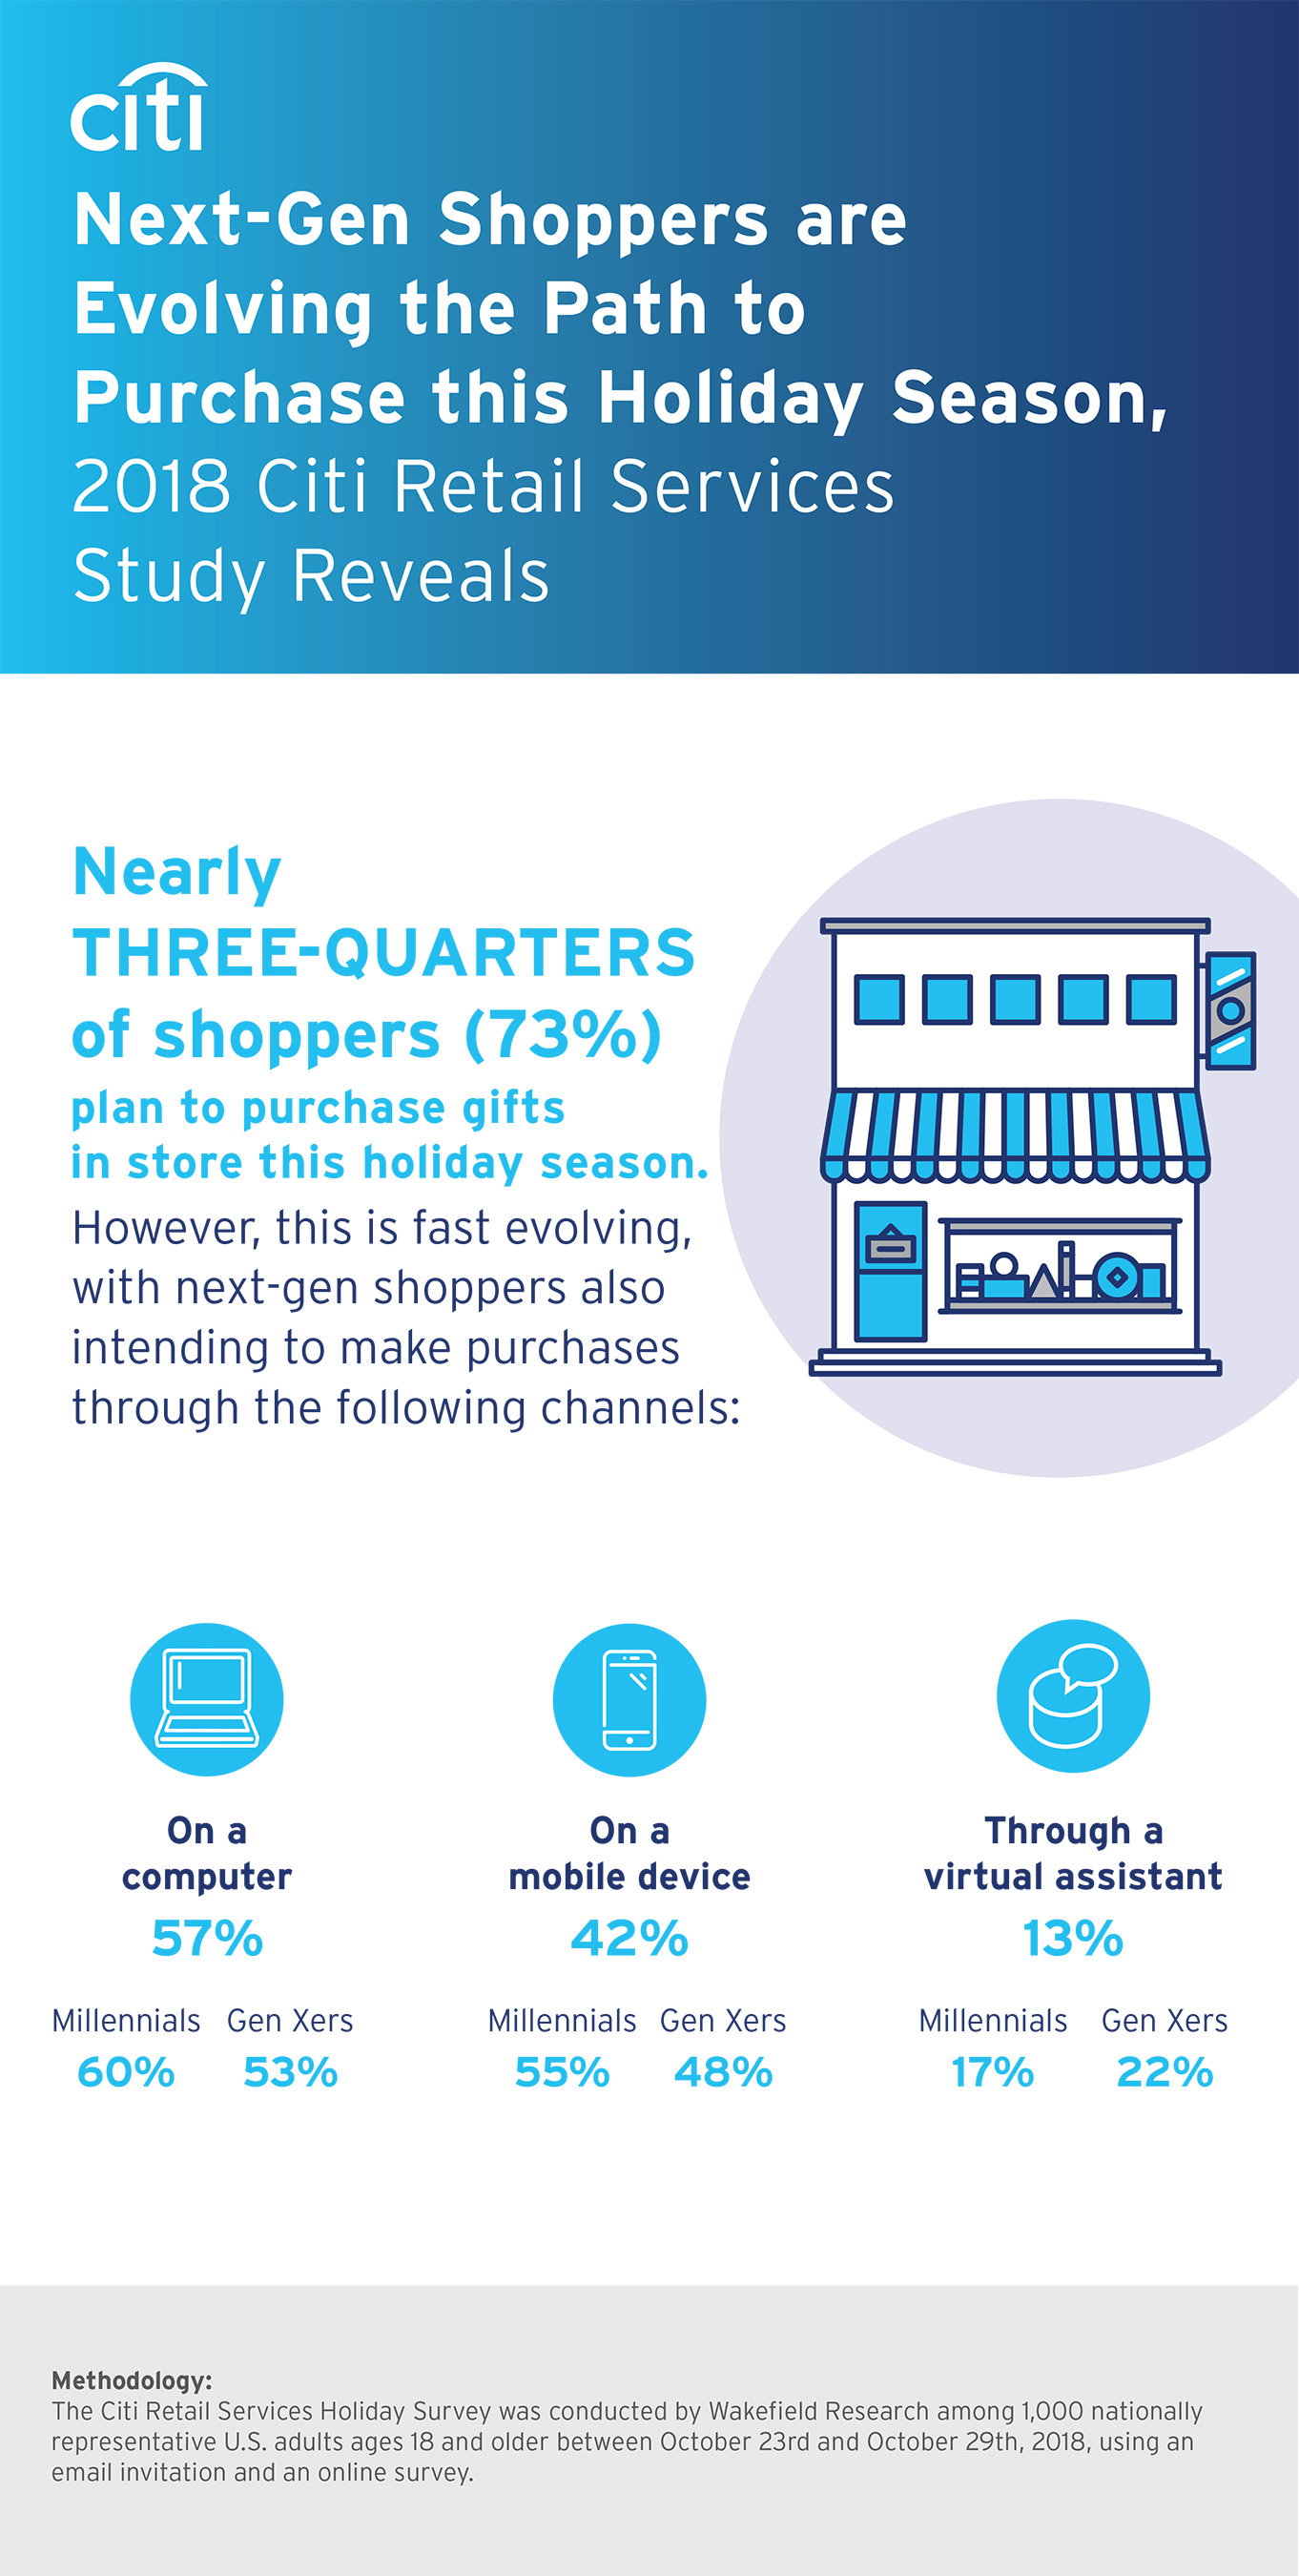 'Tis The Season for Next-Gen Holiday Shopping: New Research Shows Consumers Increasingly Adopting Tech-Driven Purchasing Habits